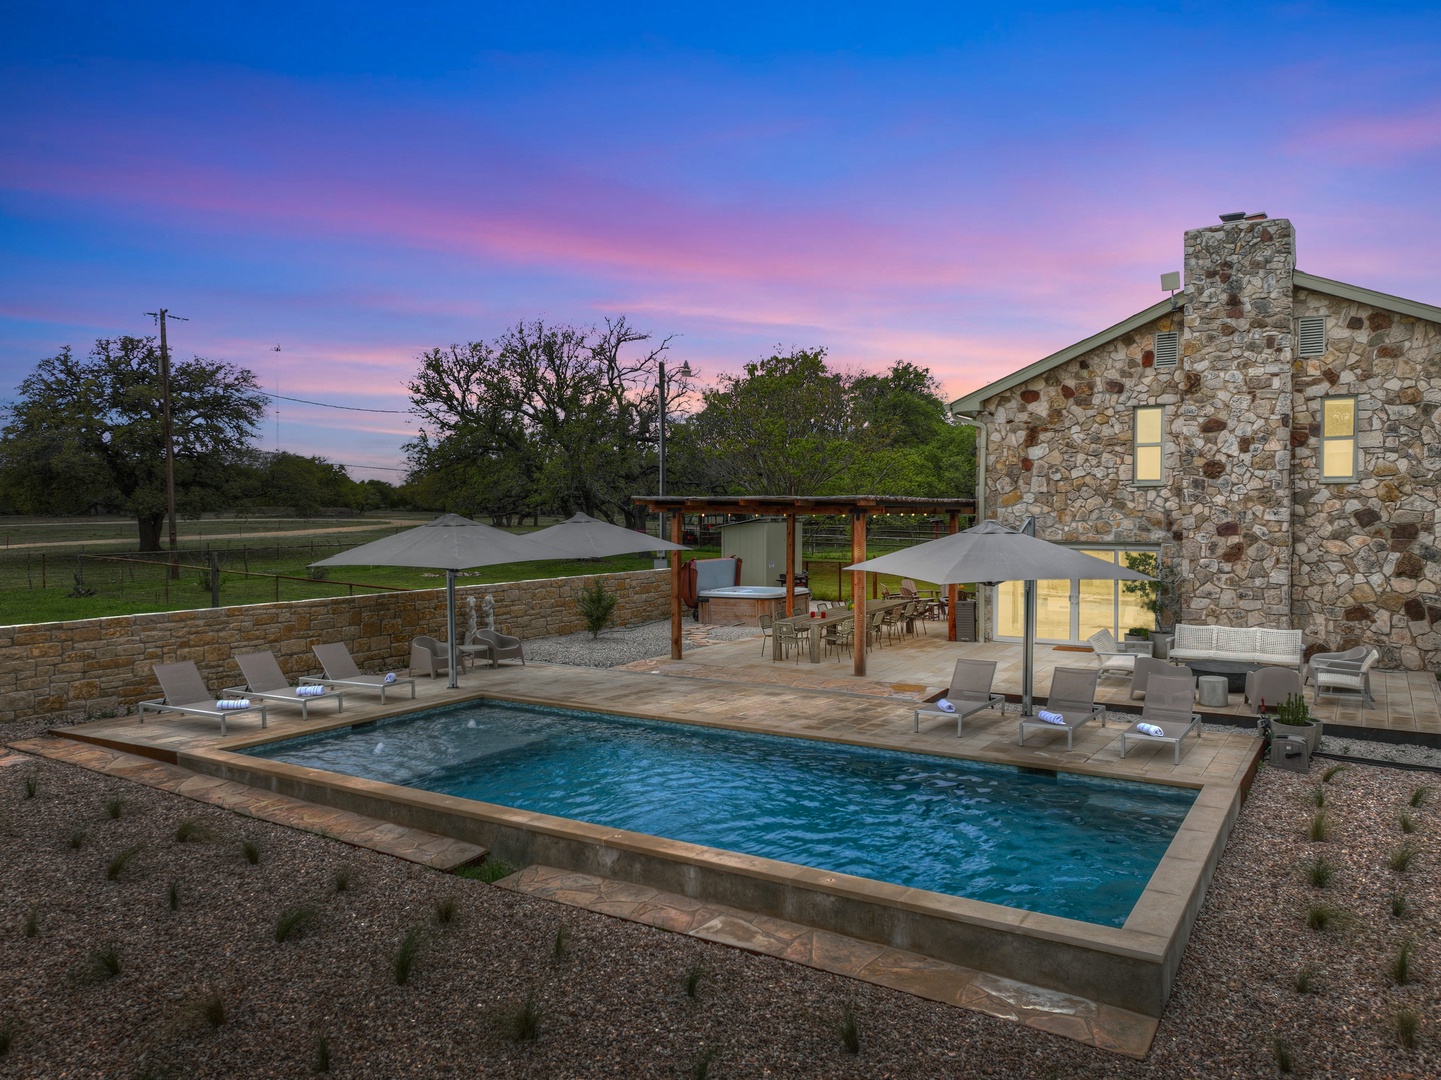 Grasslands Pool Hot Tub Hill Country Views